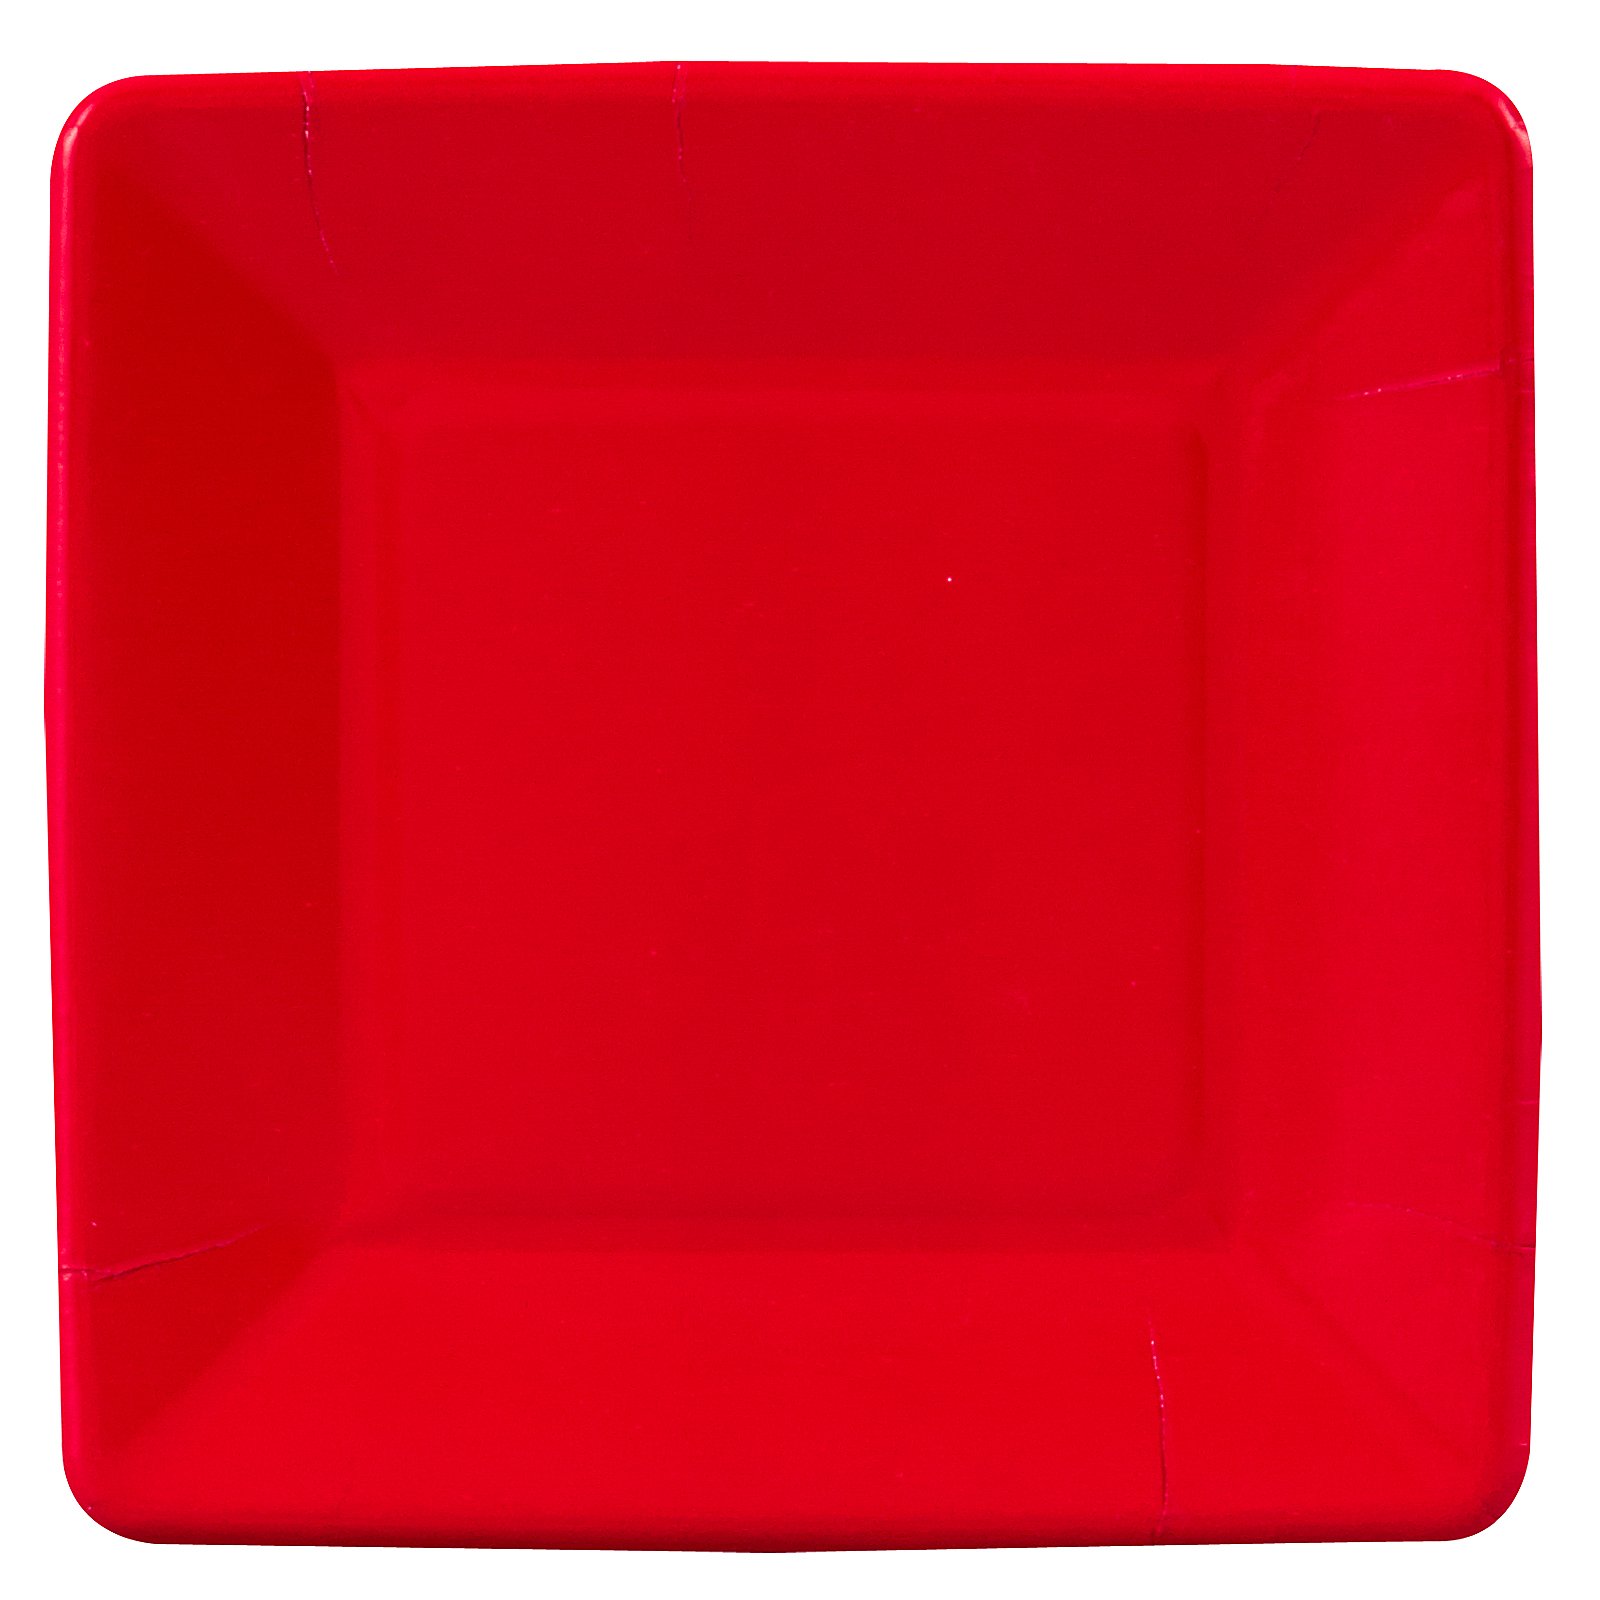 Classic Red (Red) Square Dessert Plates (18 count)